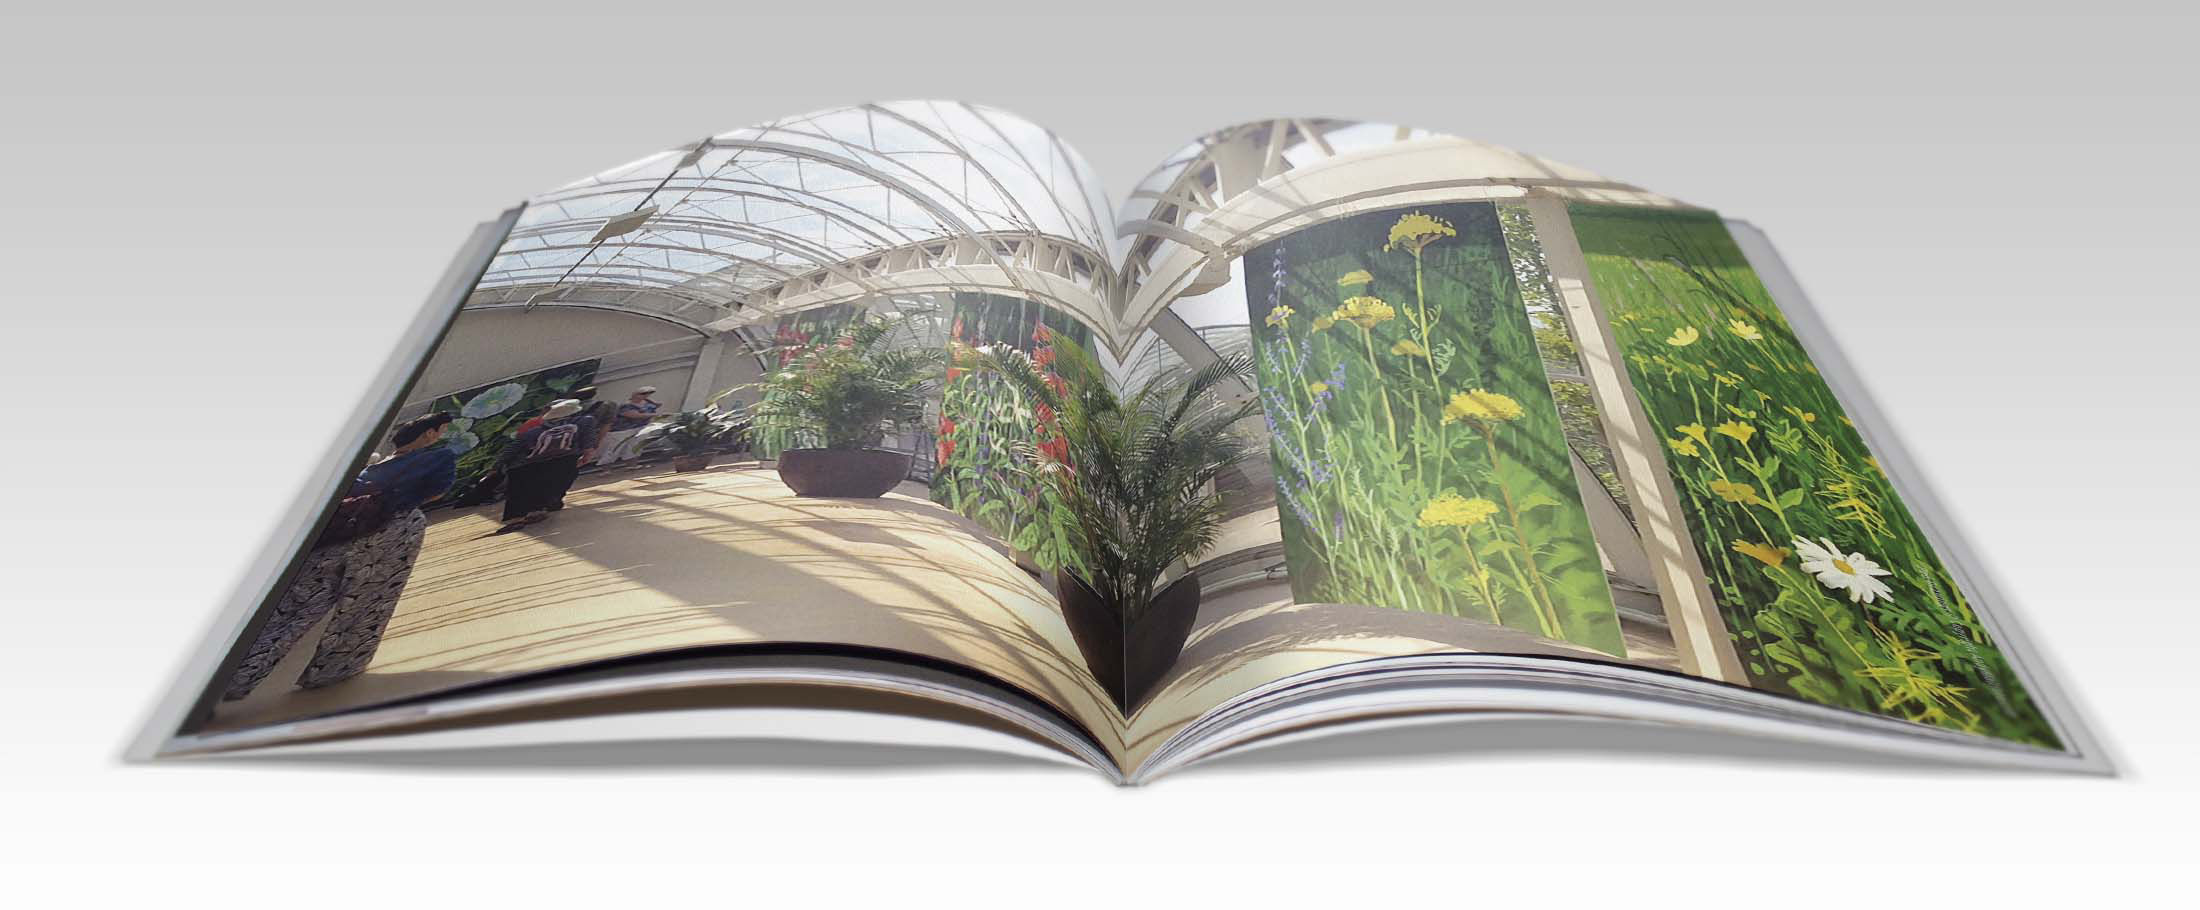 Publication - The Digital Garden® 2018, iPad drawings with Augmented Reality, Royal Horticultural Society, exhibition book, English edition.